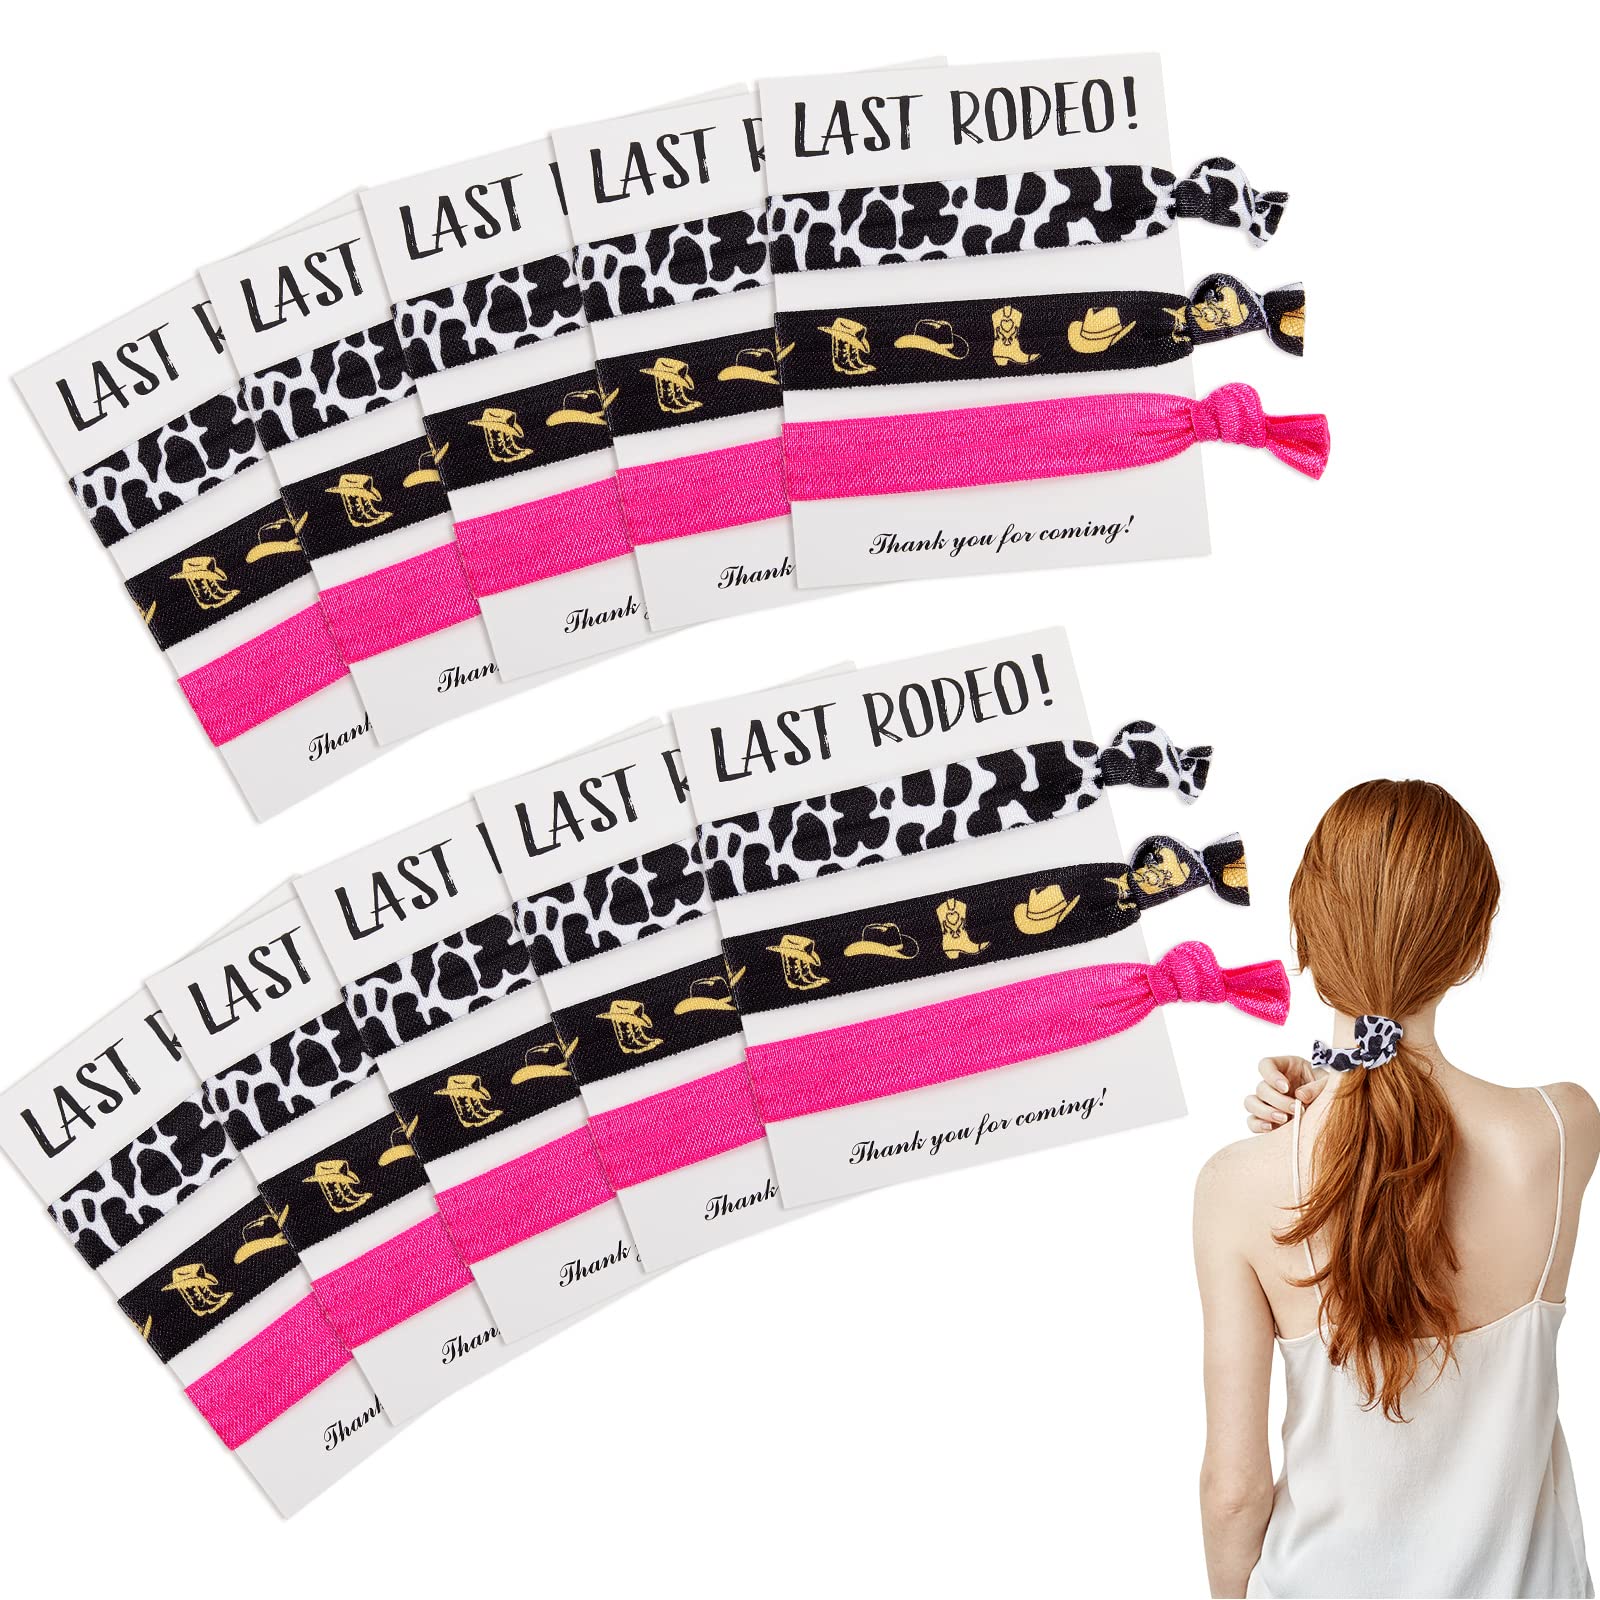 30 Pieces Cowgirl Bachelorette Party Hair Ties Last Rodeo